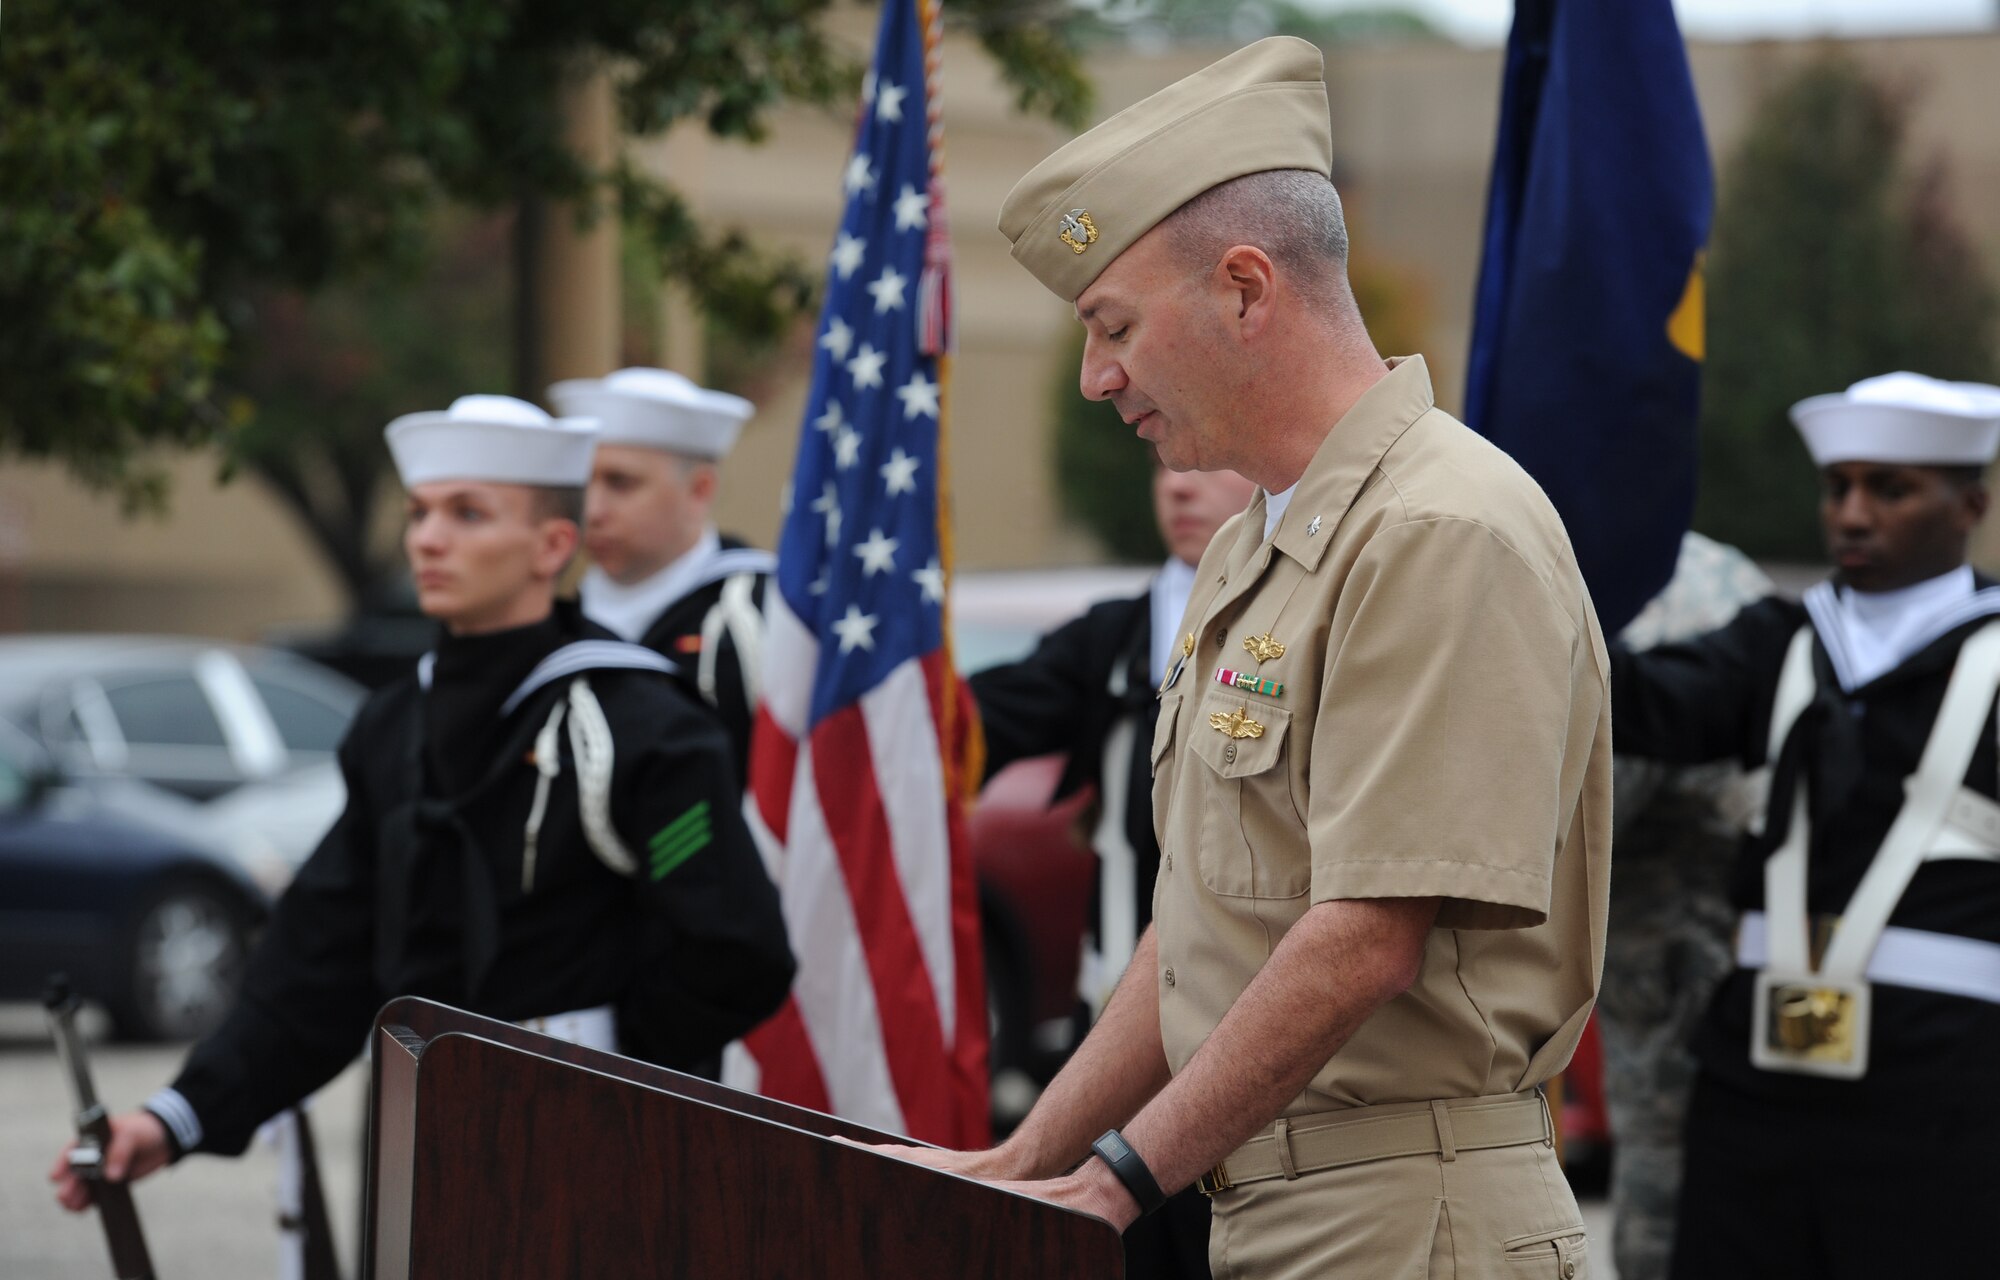 U.S. Navy Cmdr. Timothy Knapp, Center for Naval Aviation Technical Training Unit Keesler commanding officer, delivers remarks during a CNATTU Keesler Pearl Harbor 75th Anniversary Remembrance Ceremony in front of Allee Hall Dec. 7, 2016, on Keesler Air Force Base, Miss. More than 100 Keesler personnel attended the event to honor those lost in the Dec. 7, 1941 Pearl Harbor attacks. (U.S. Air Force photo by Kemberly Groue)